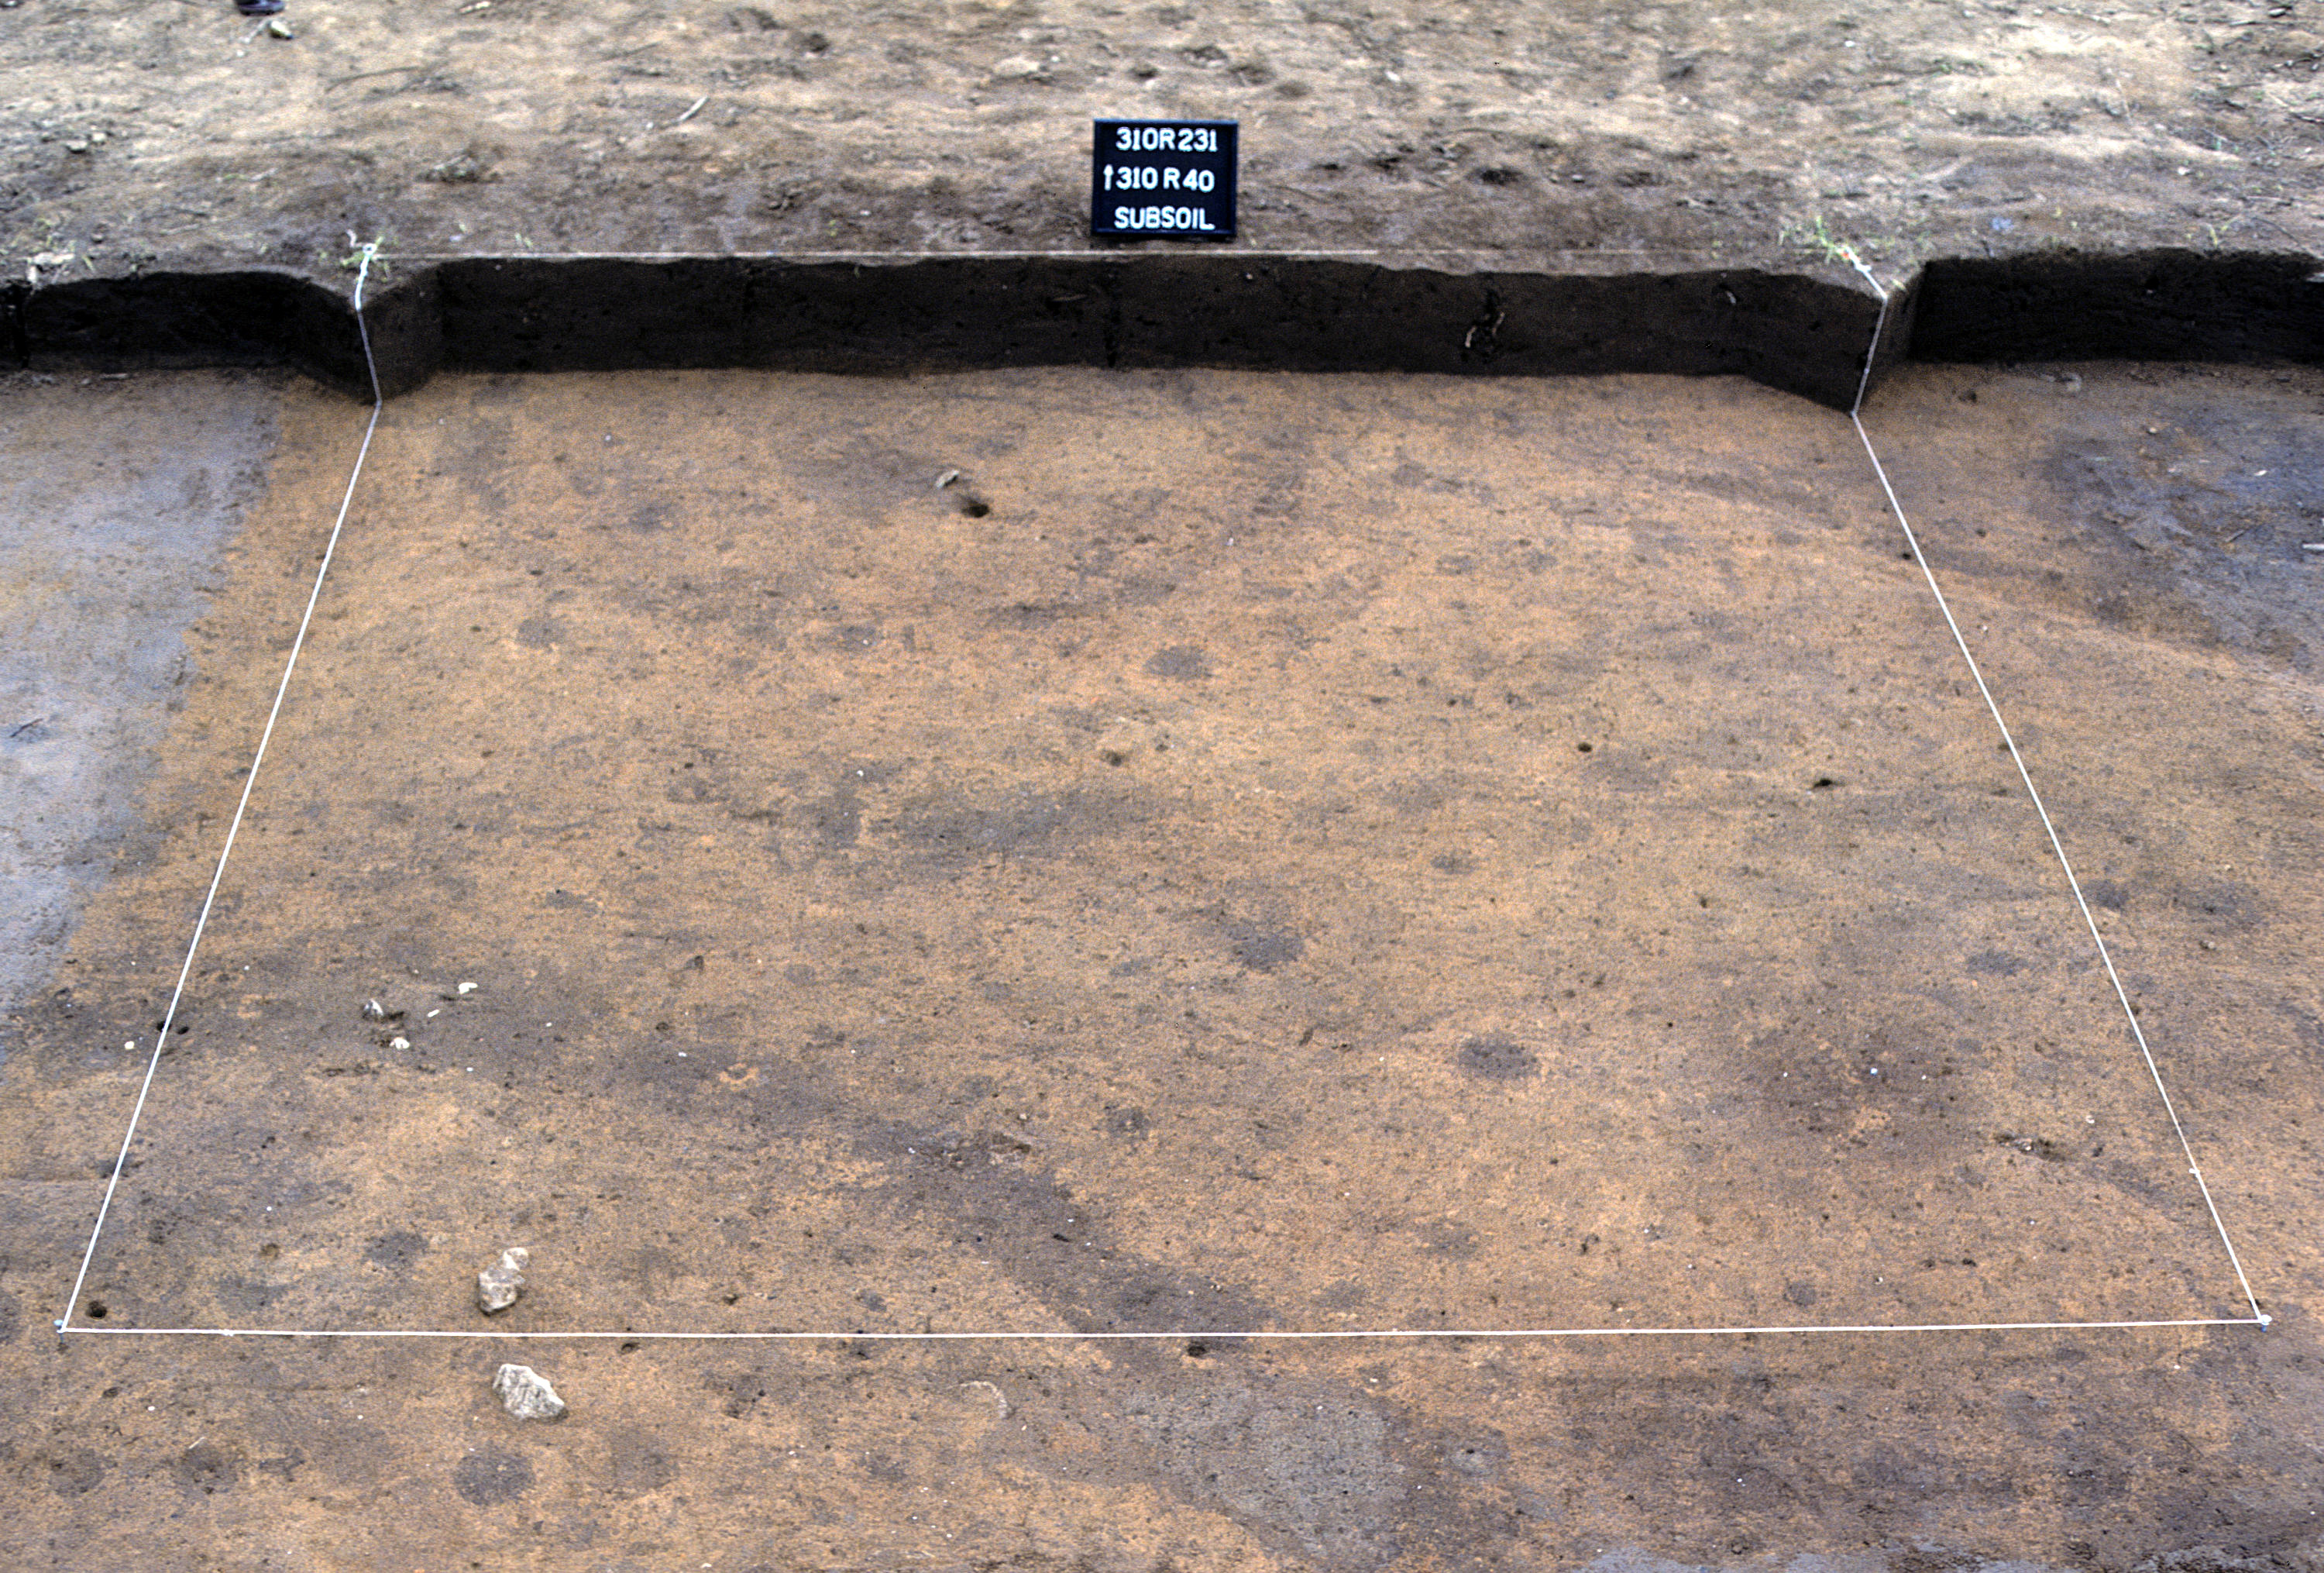 Figure 1017. Sq. 310R40 at top of subsoil (view to north).